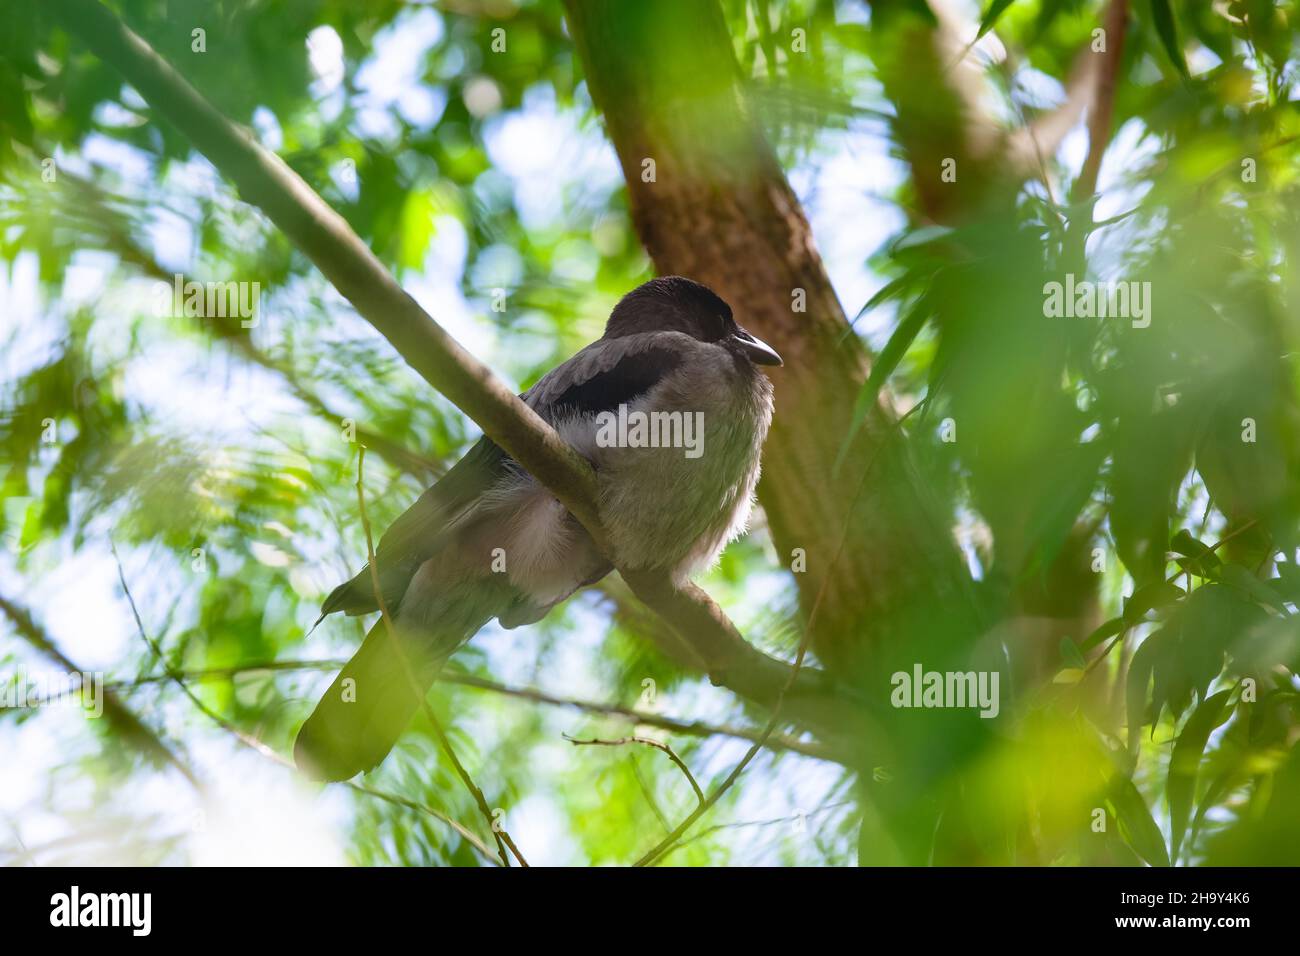 Big baby crow sitting in a tree. Stock Photo